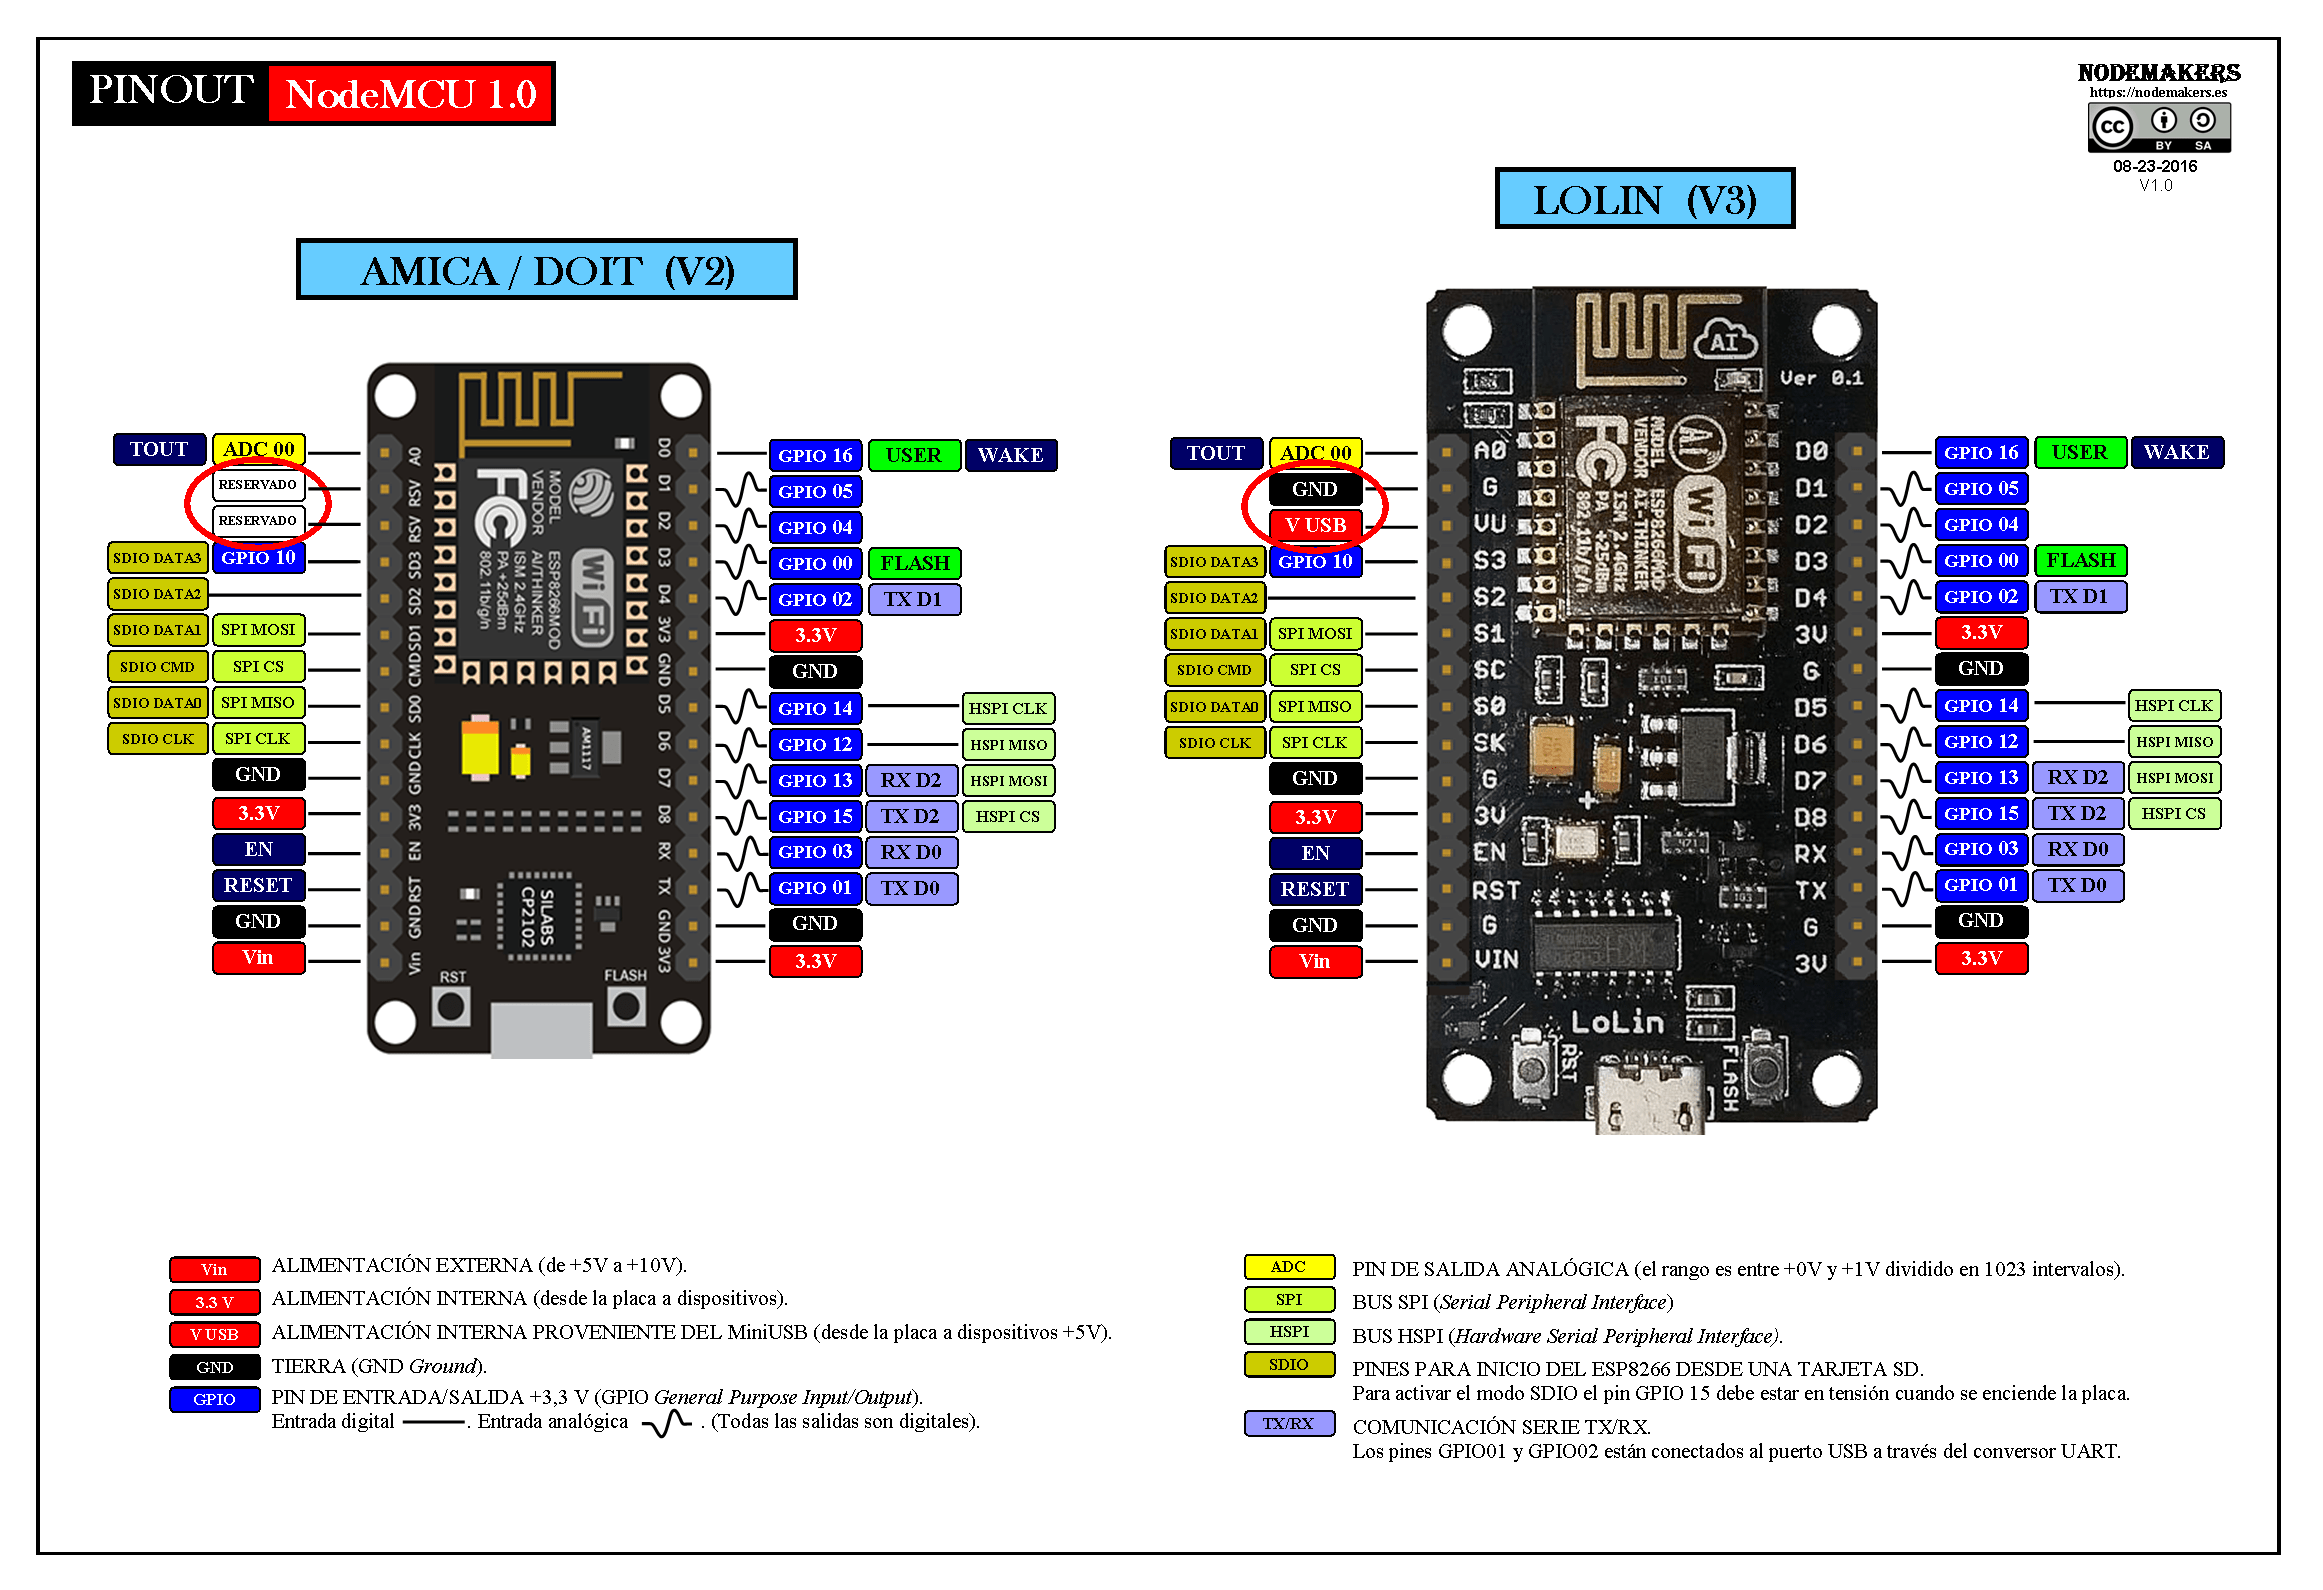 Complete Pinout Reference Guide For Nodemcu Diy Development Board